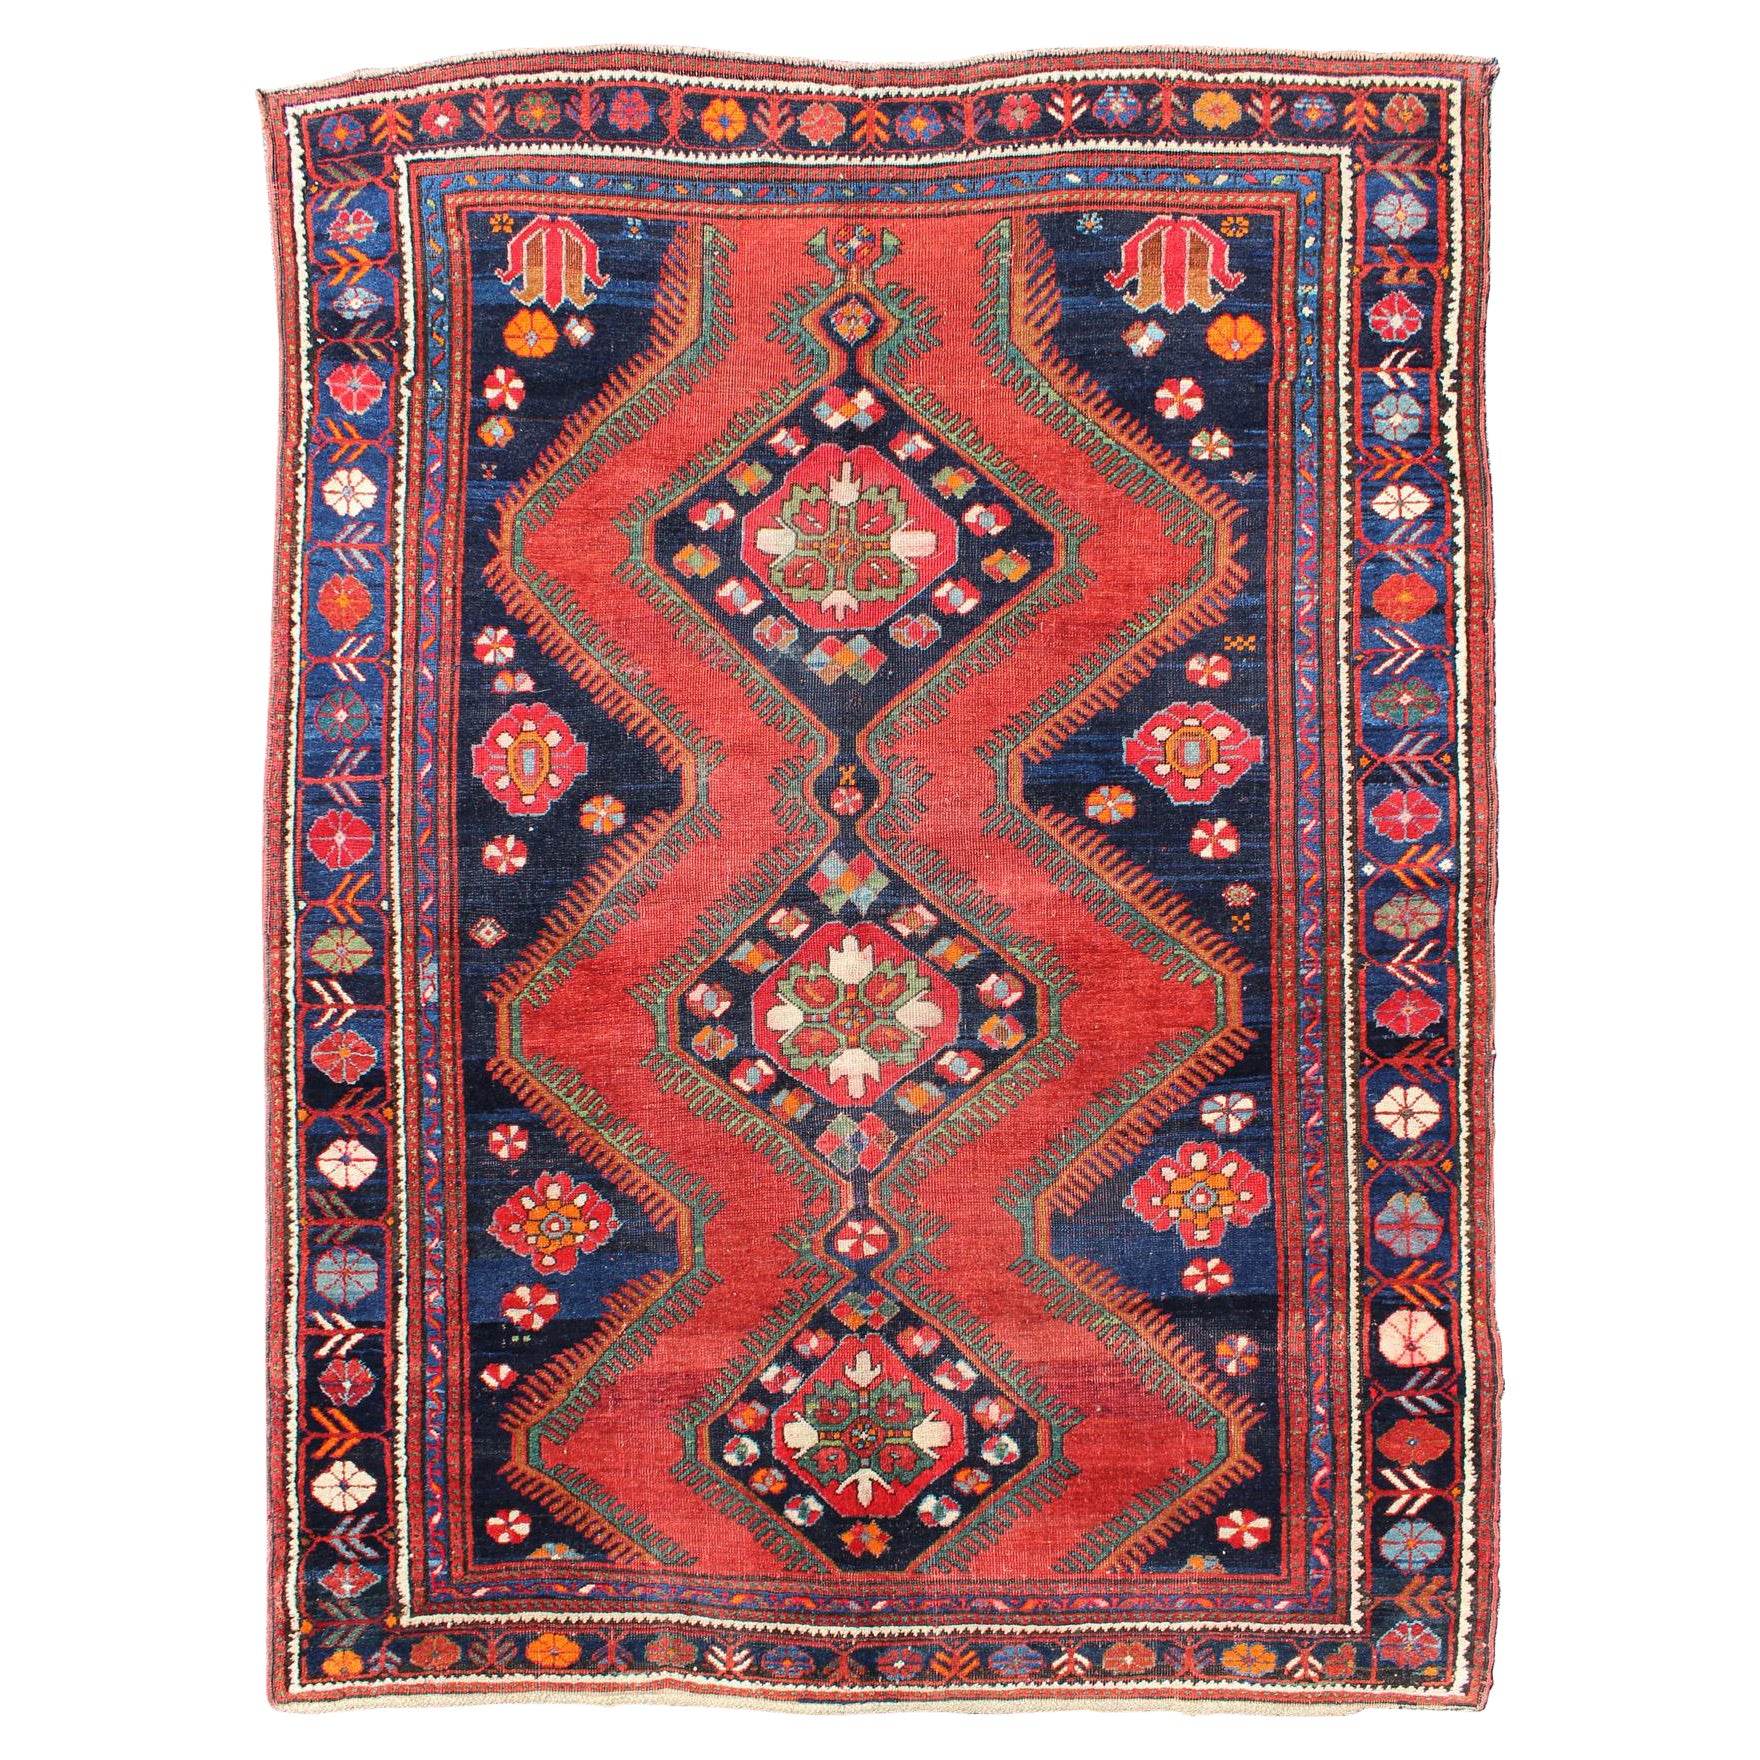 Antique Caucasian Karabagh Rug in Red, Navy Blue with Geometric Medallions For Sale